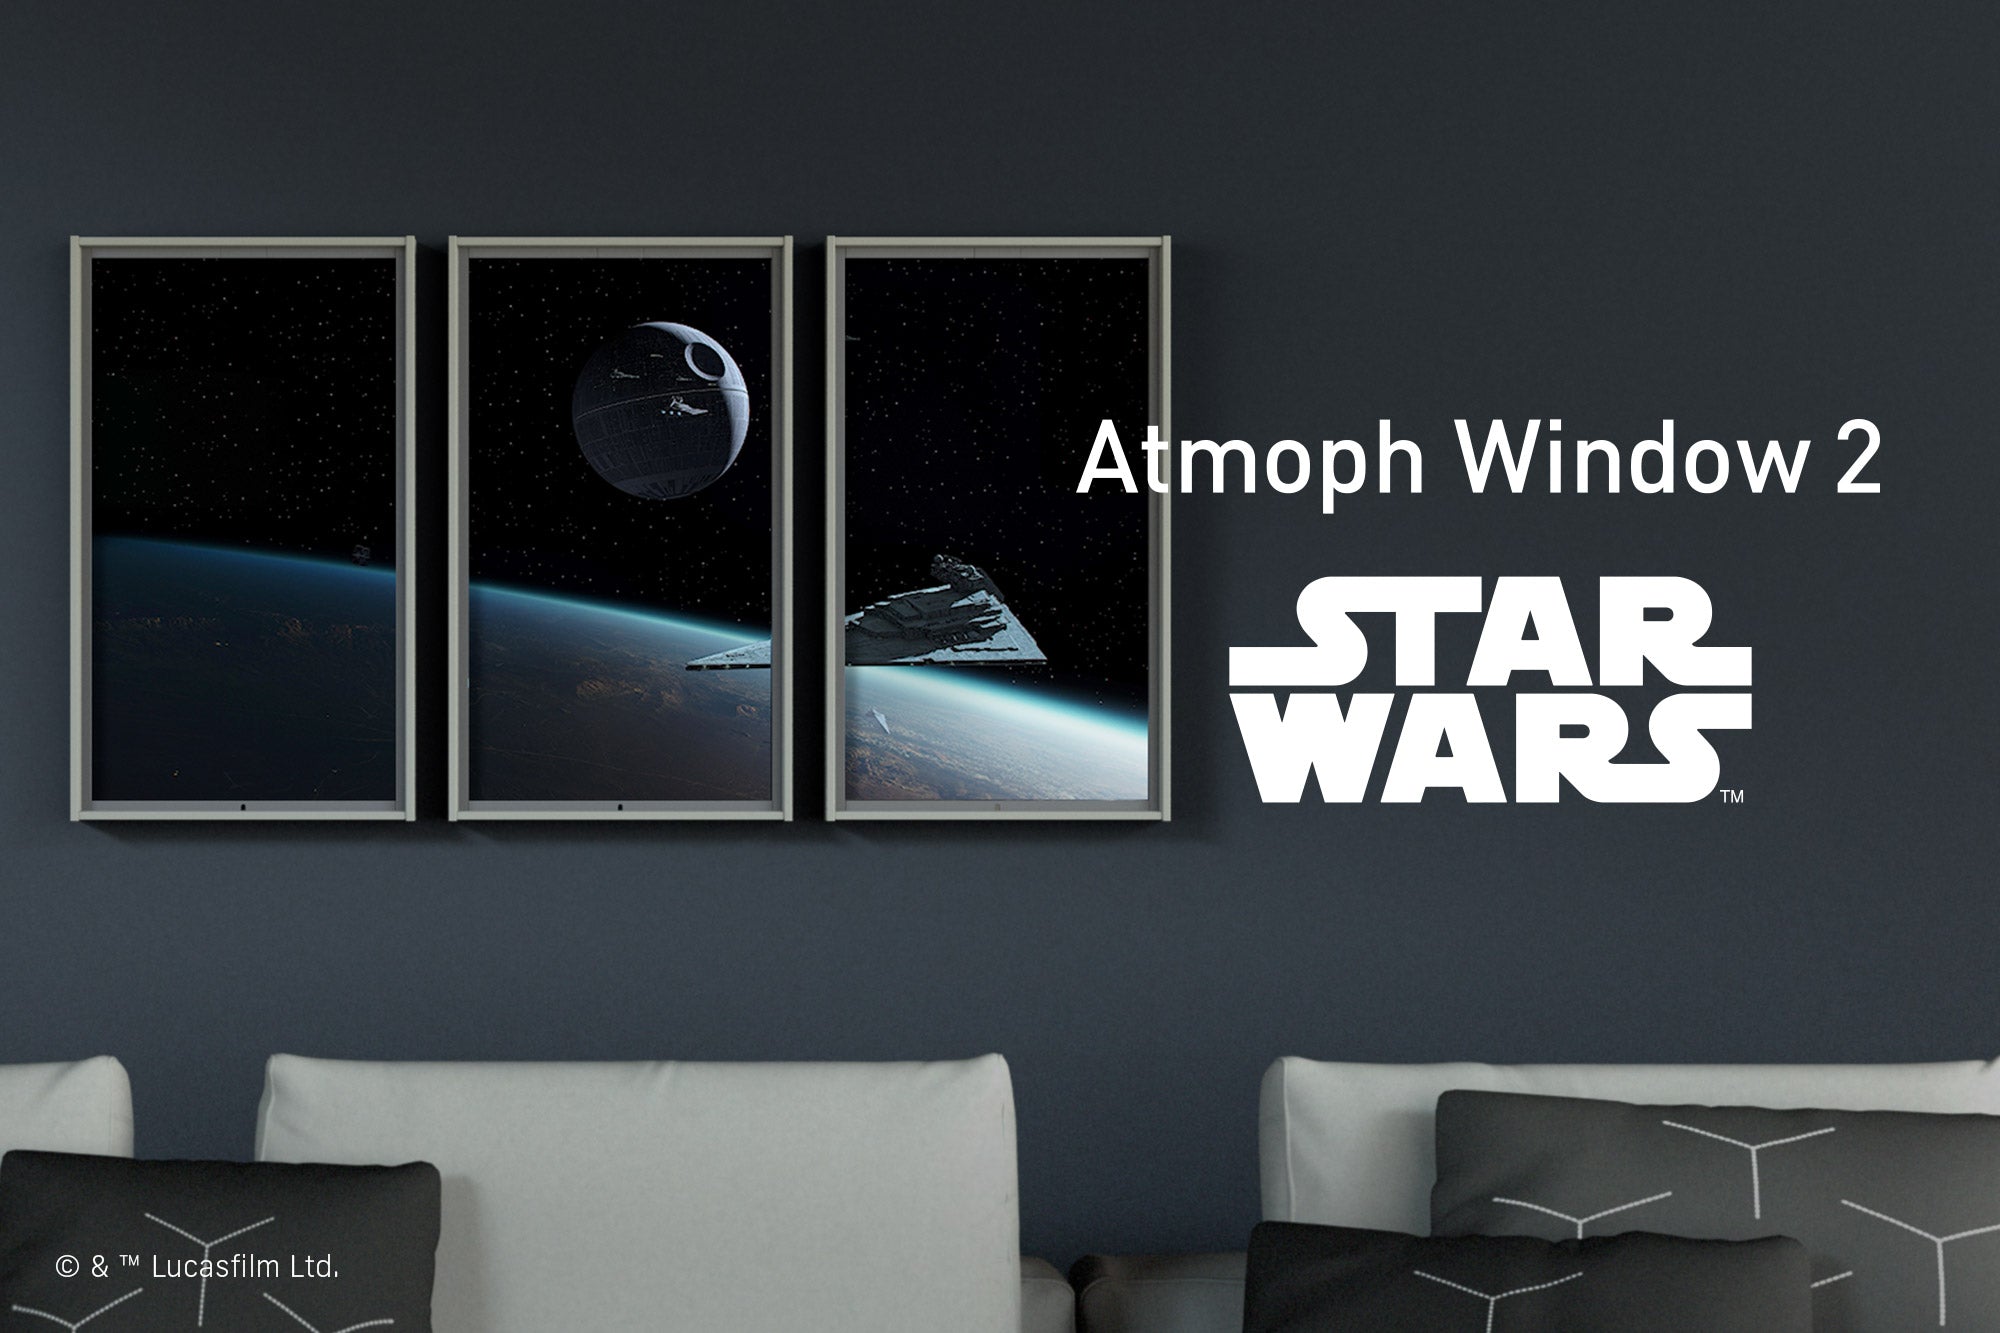 Atmoph Window 2 | Star Wars will available from Friday, Feb 26 